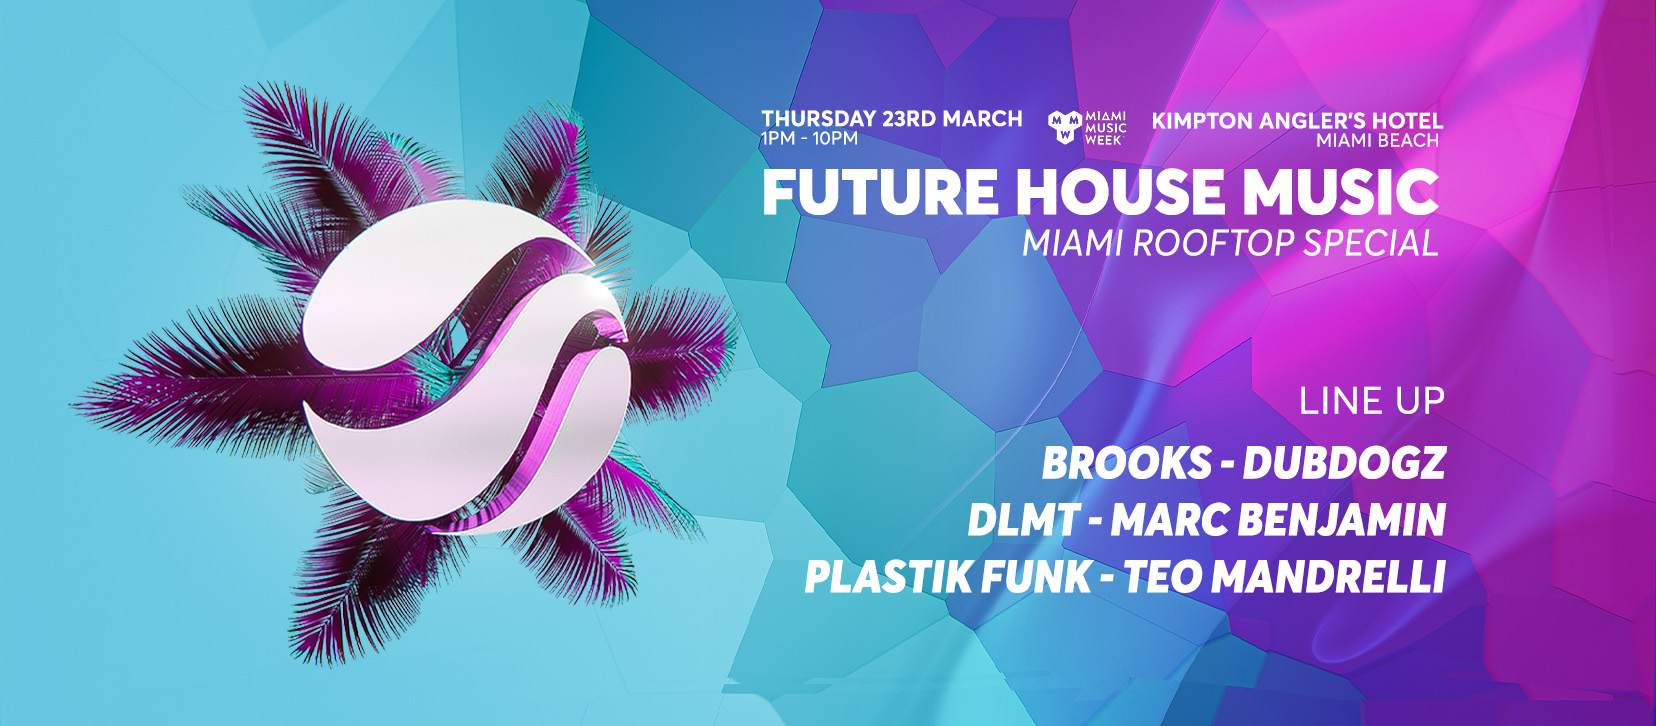 Future House Music - Miami Music Week - Rooftop Special - Página frontal